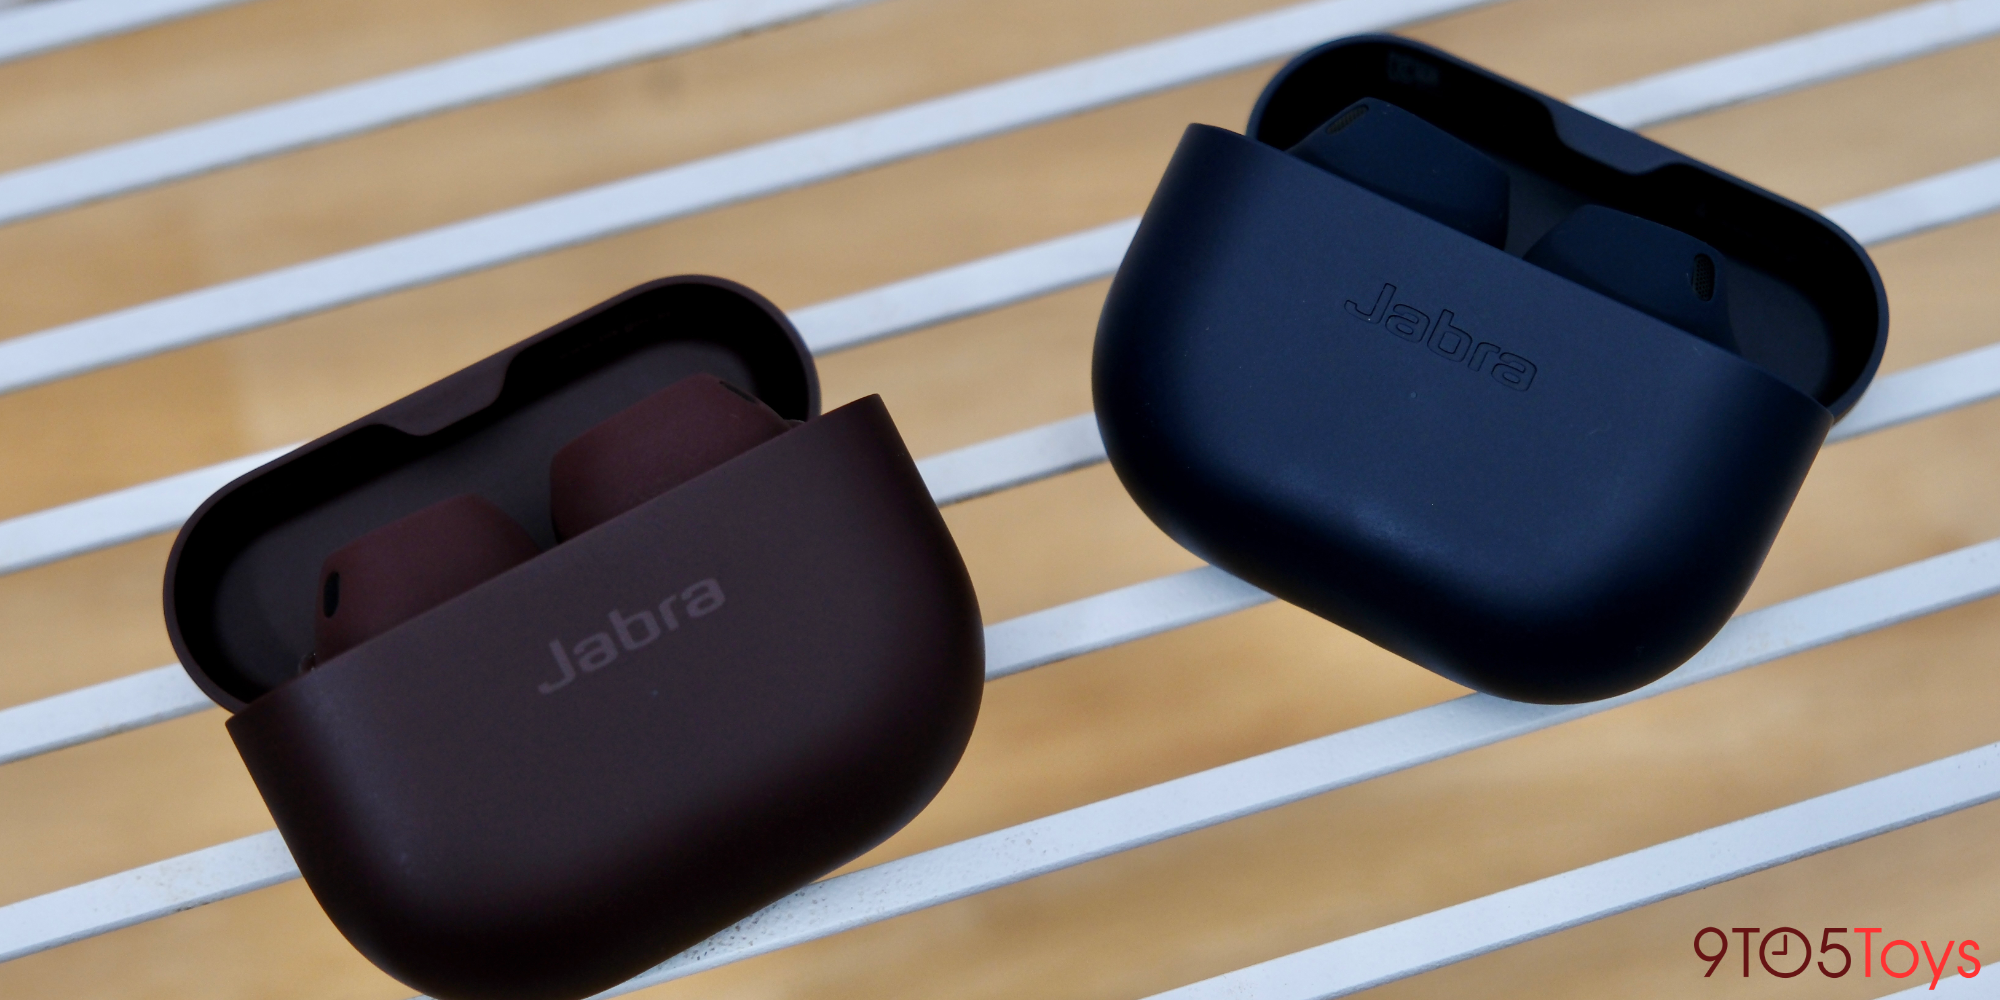 Jabra plans improved wind and conversation cancelation with